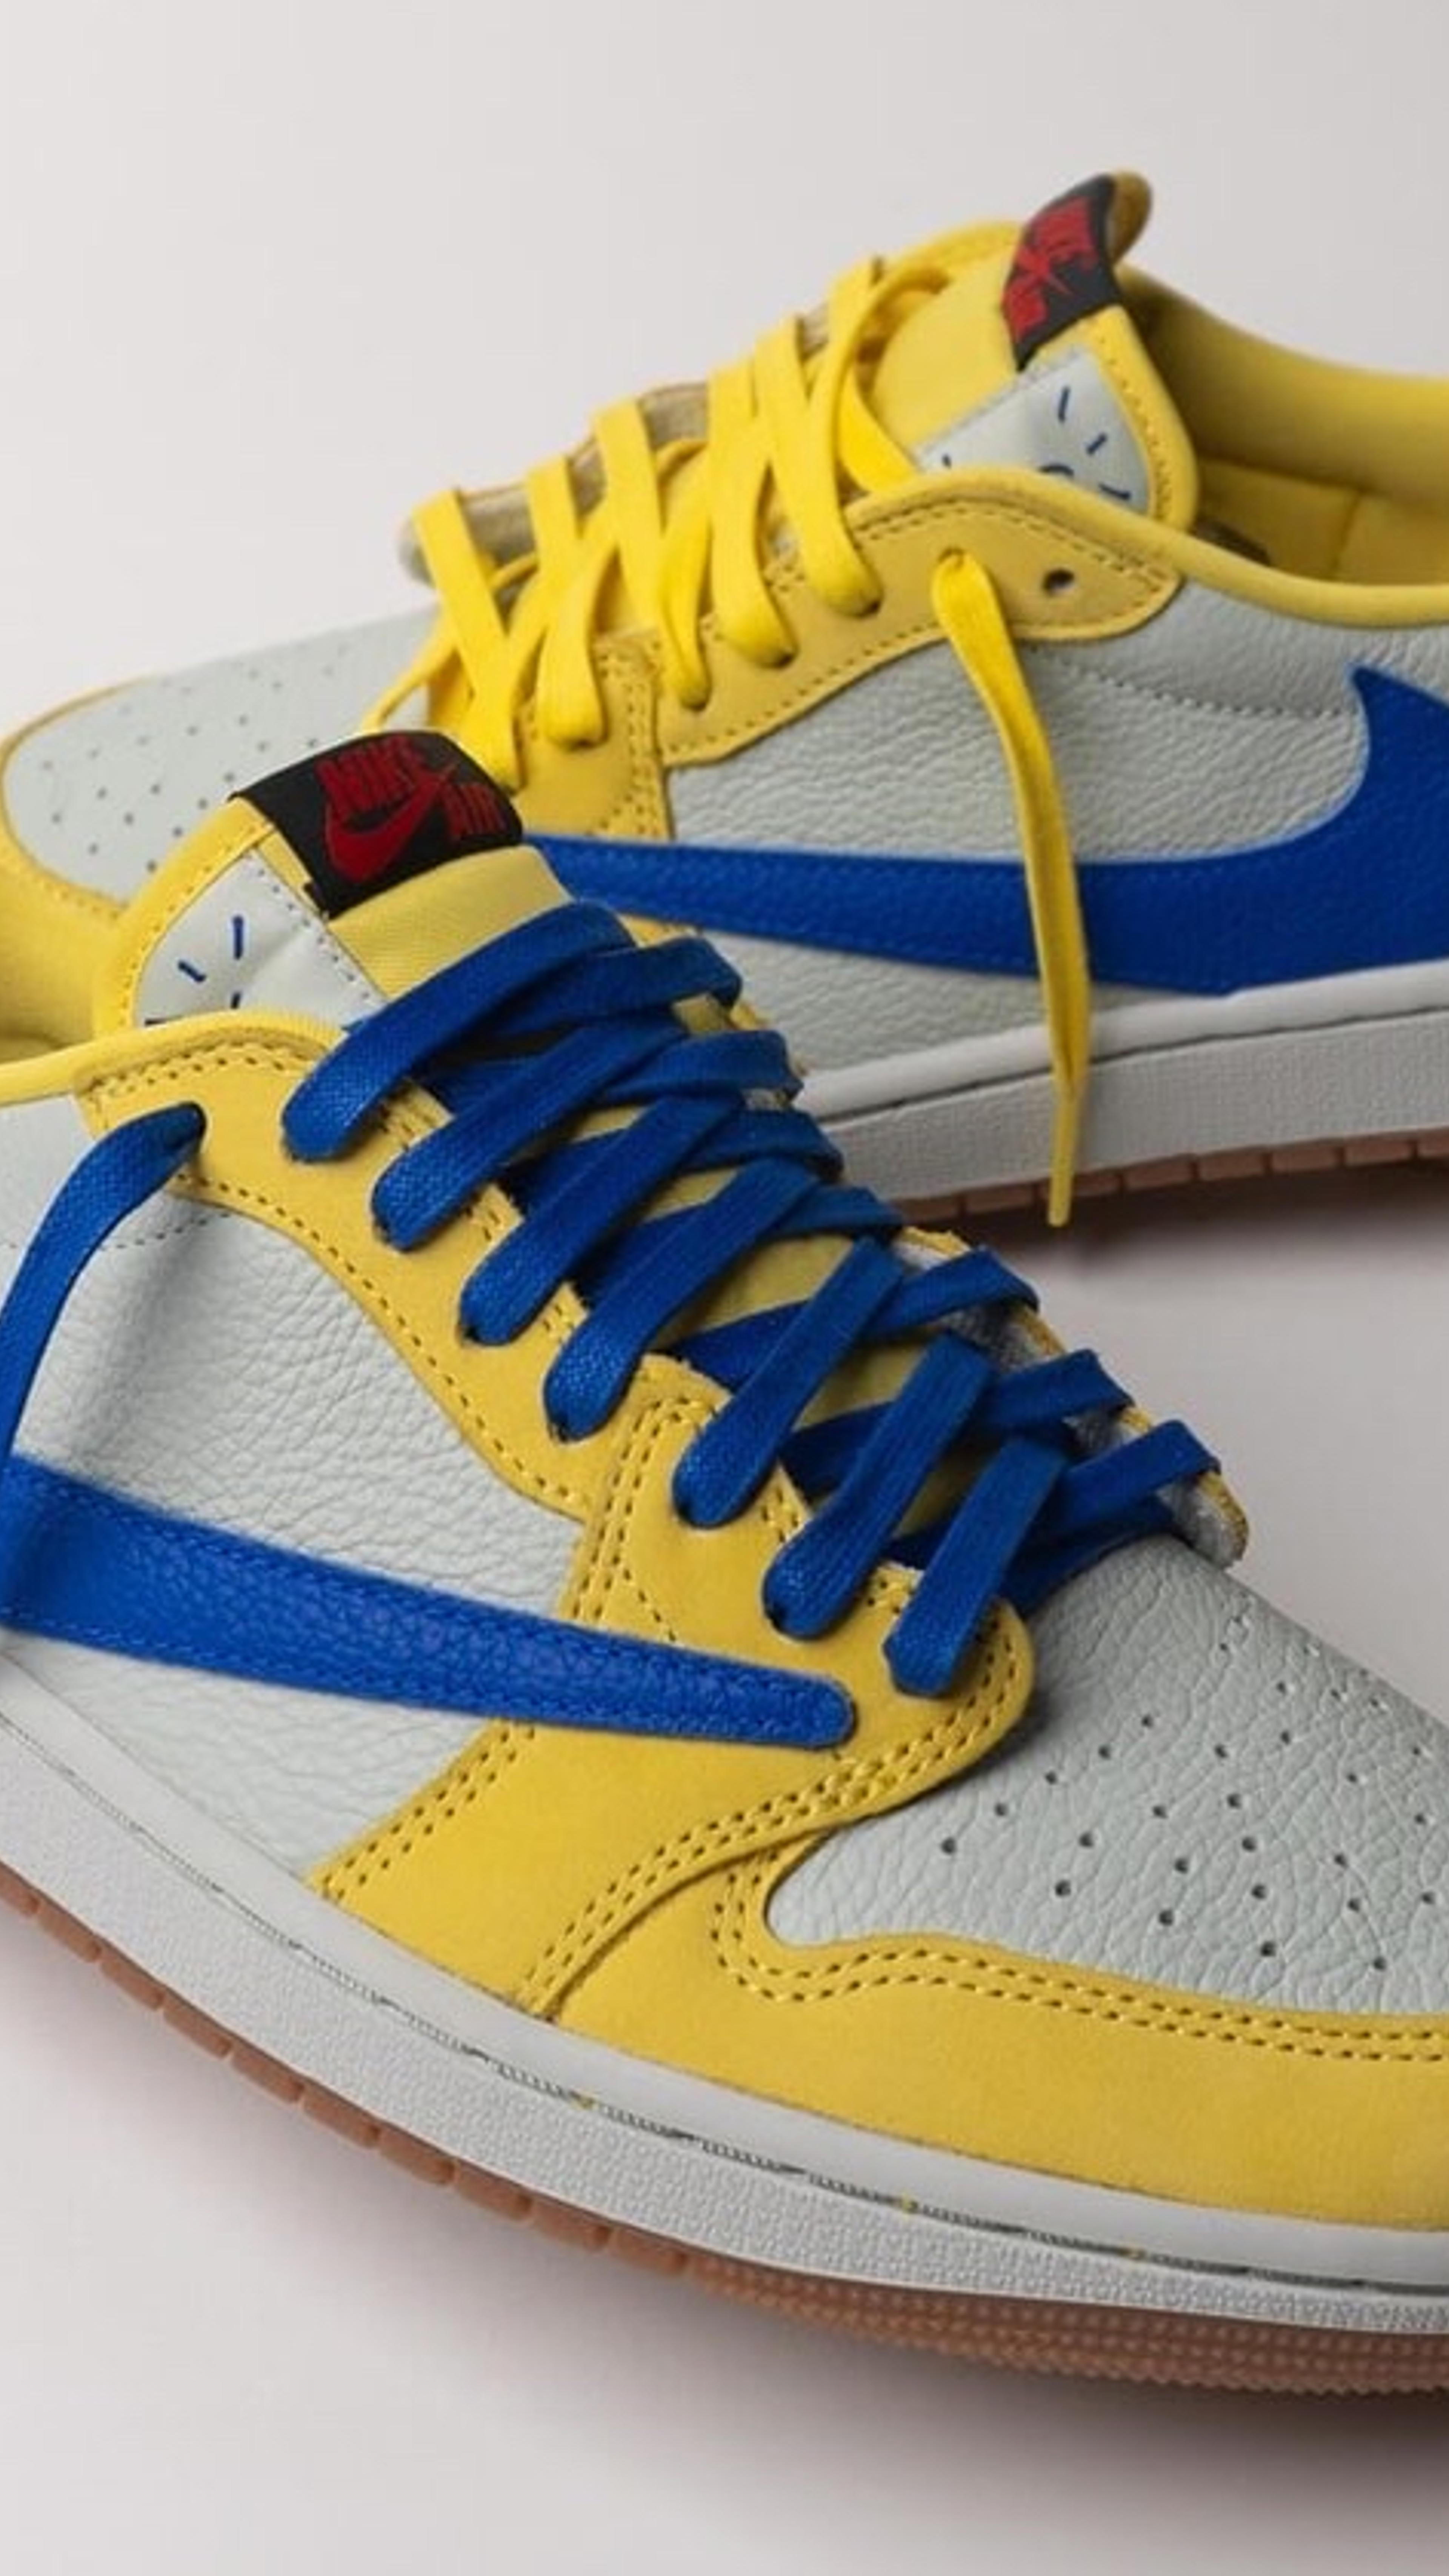 Preview image for the show titled "JORDAN 1 LOW CANARY! SIZE 5W - 15W 
1$ AUCTION - 160 PAIRS" at May 7, 2024